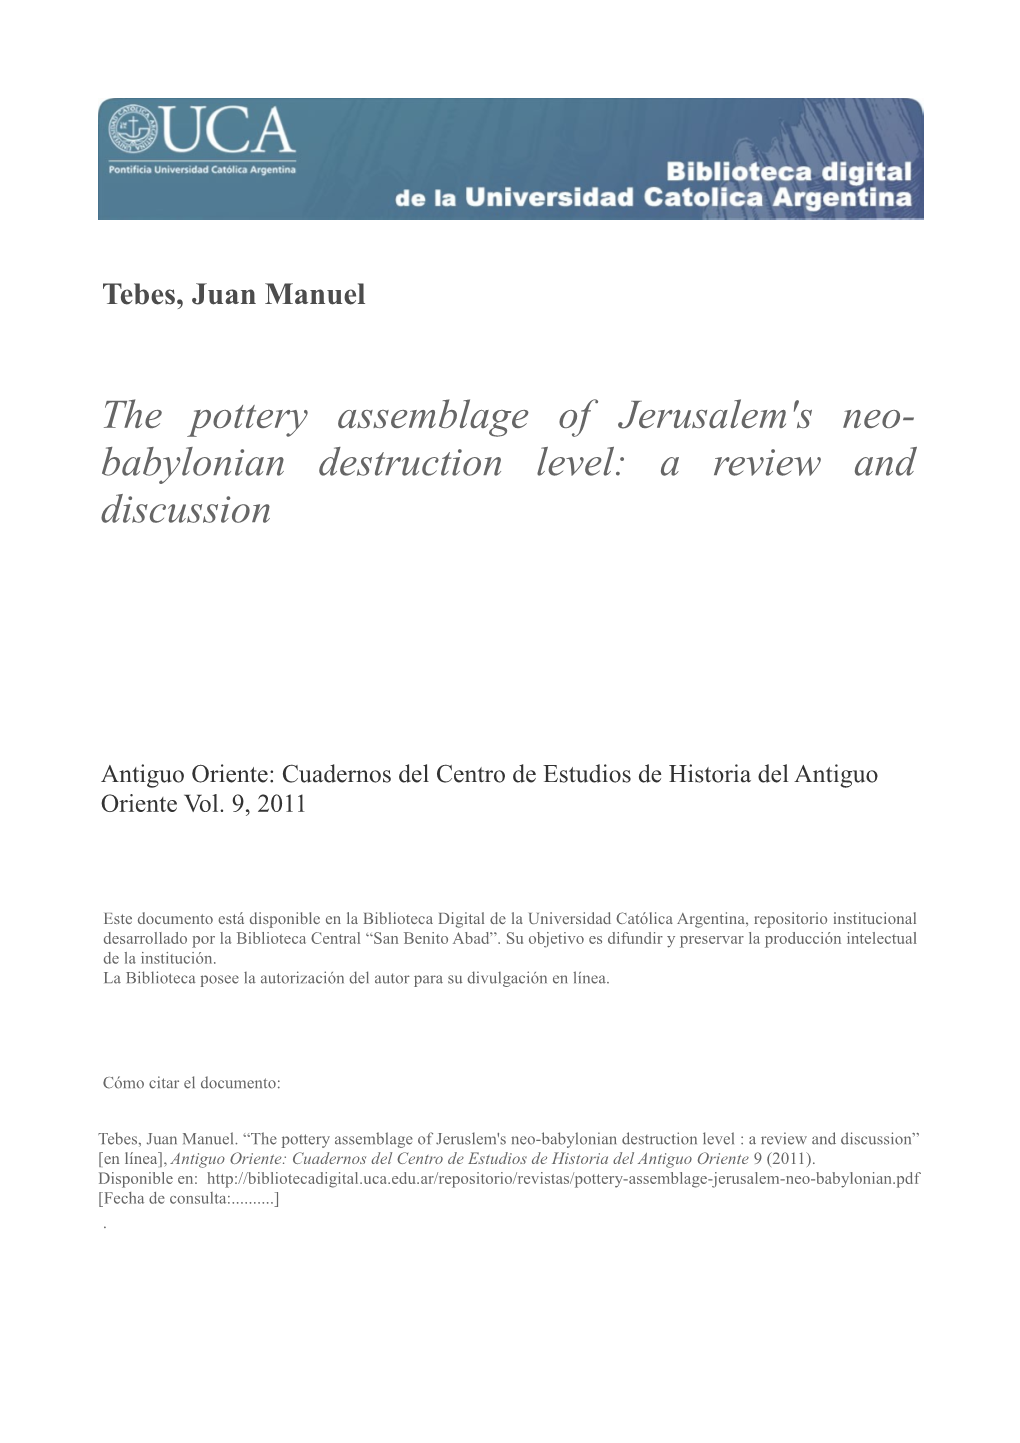 The Pottery Assemblage of Jerusalem's Neo- Babylonian Destruction Level: a Review and Discussion